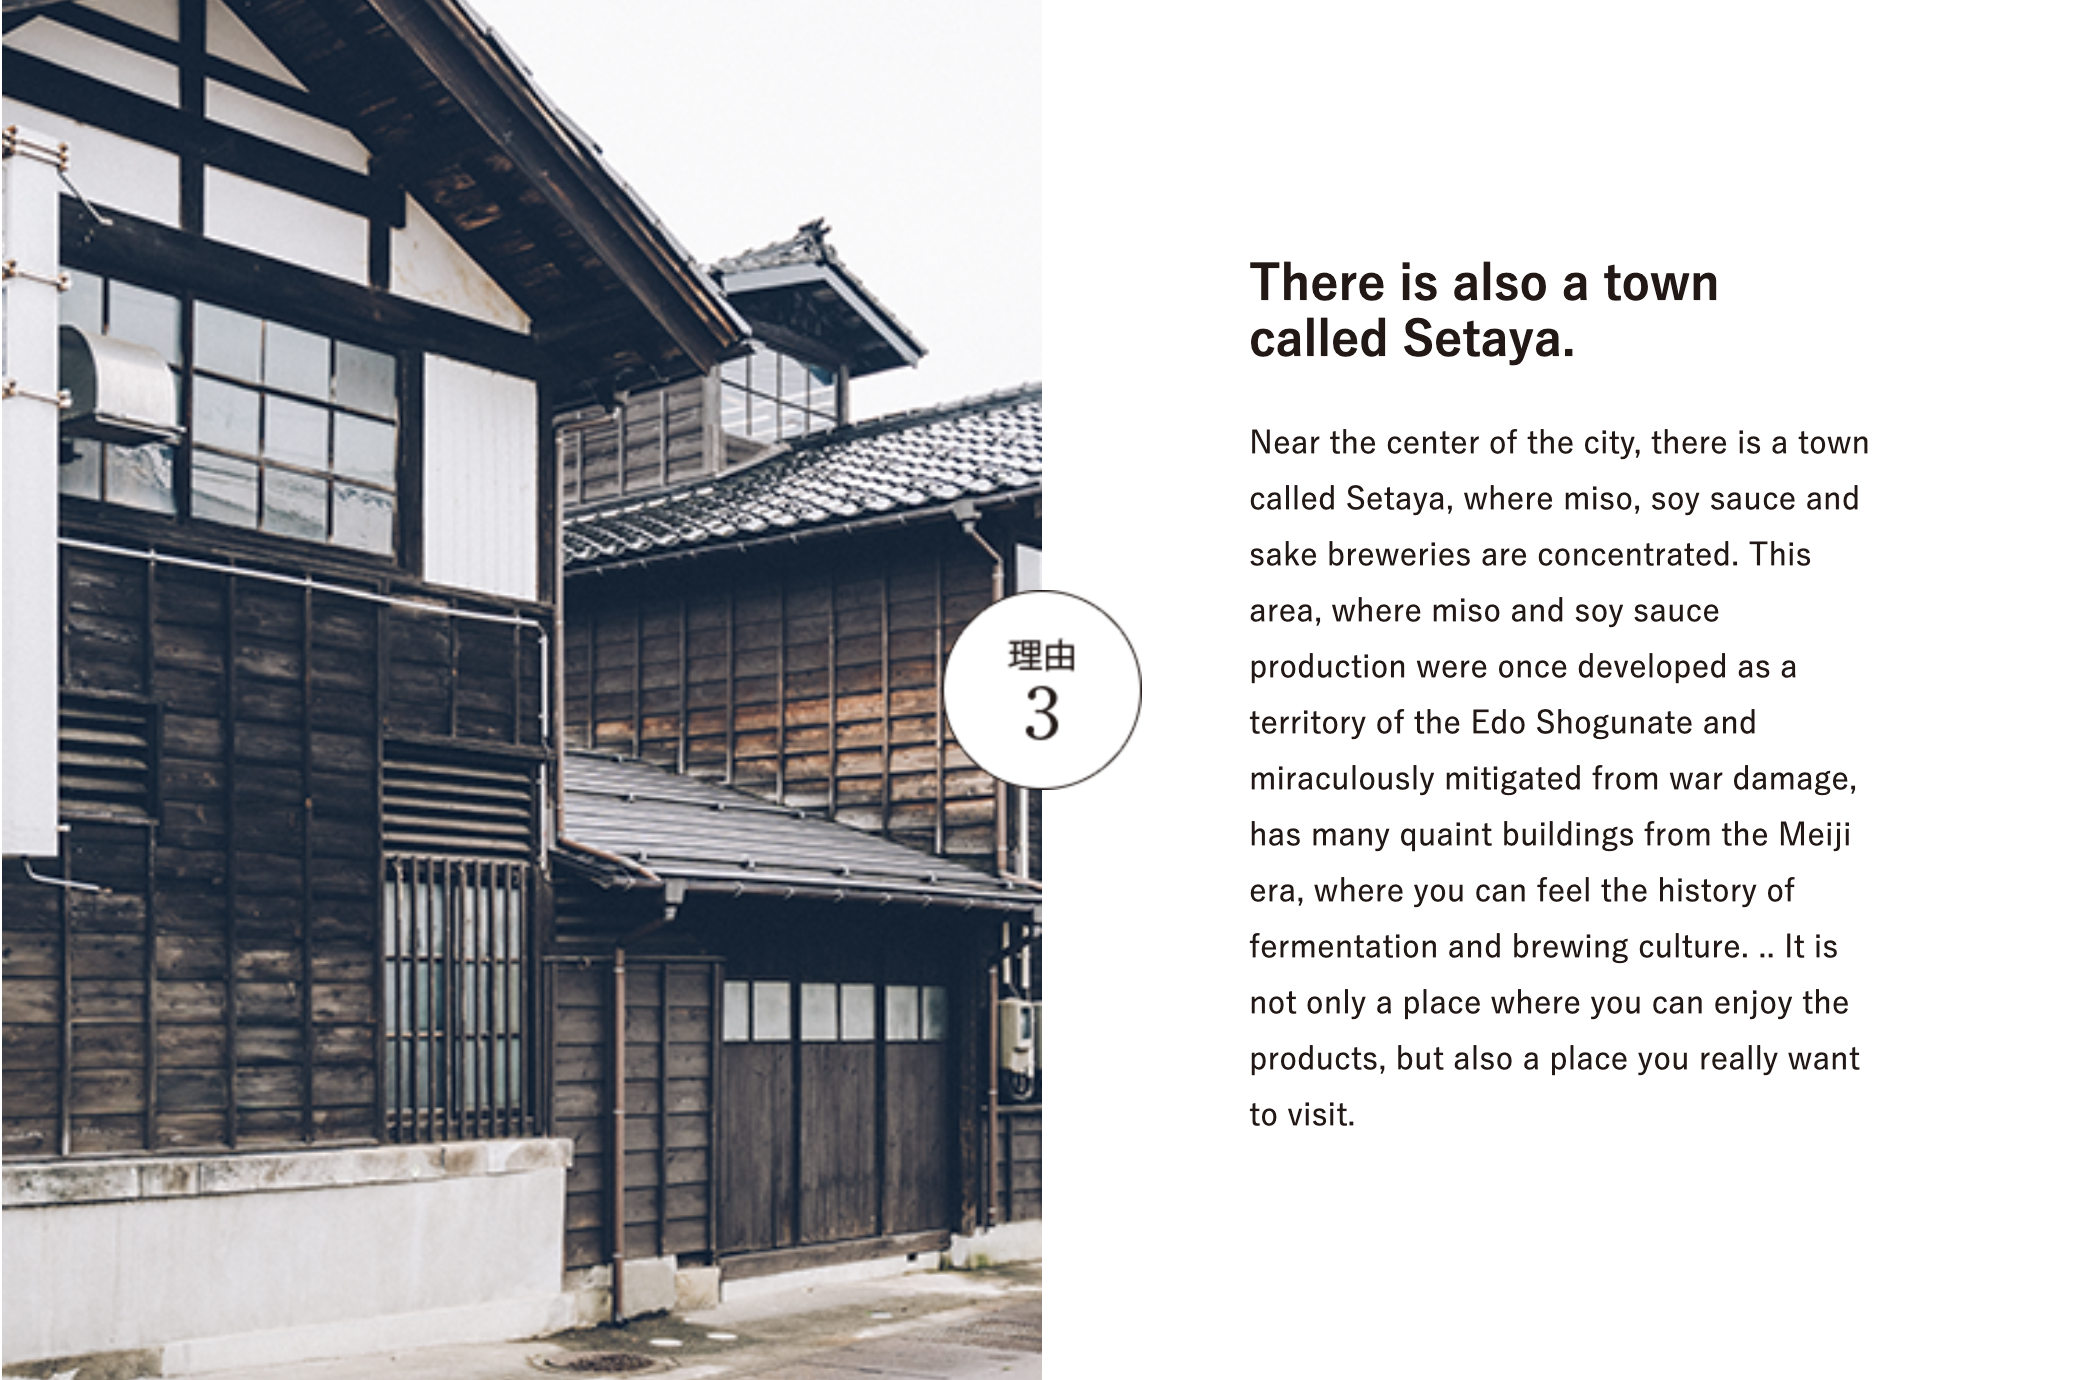 Nagaoka: The town for fermentation and brewing